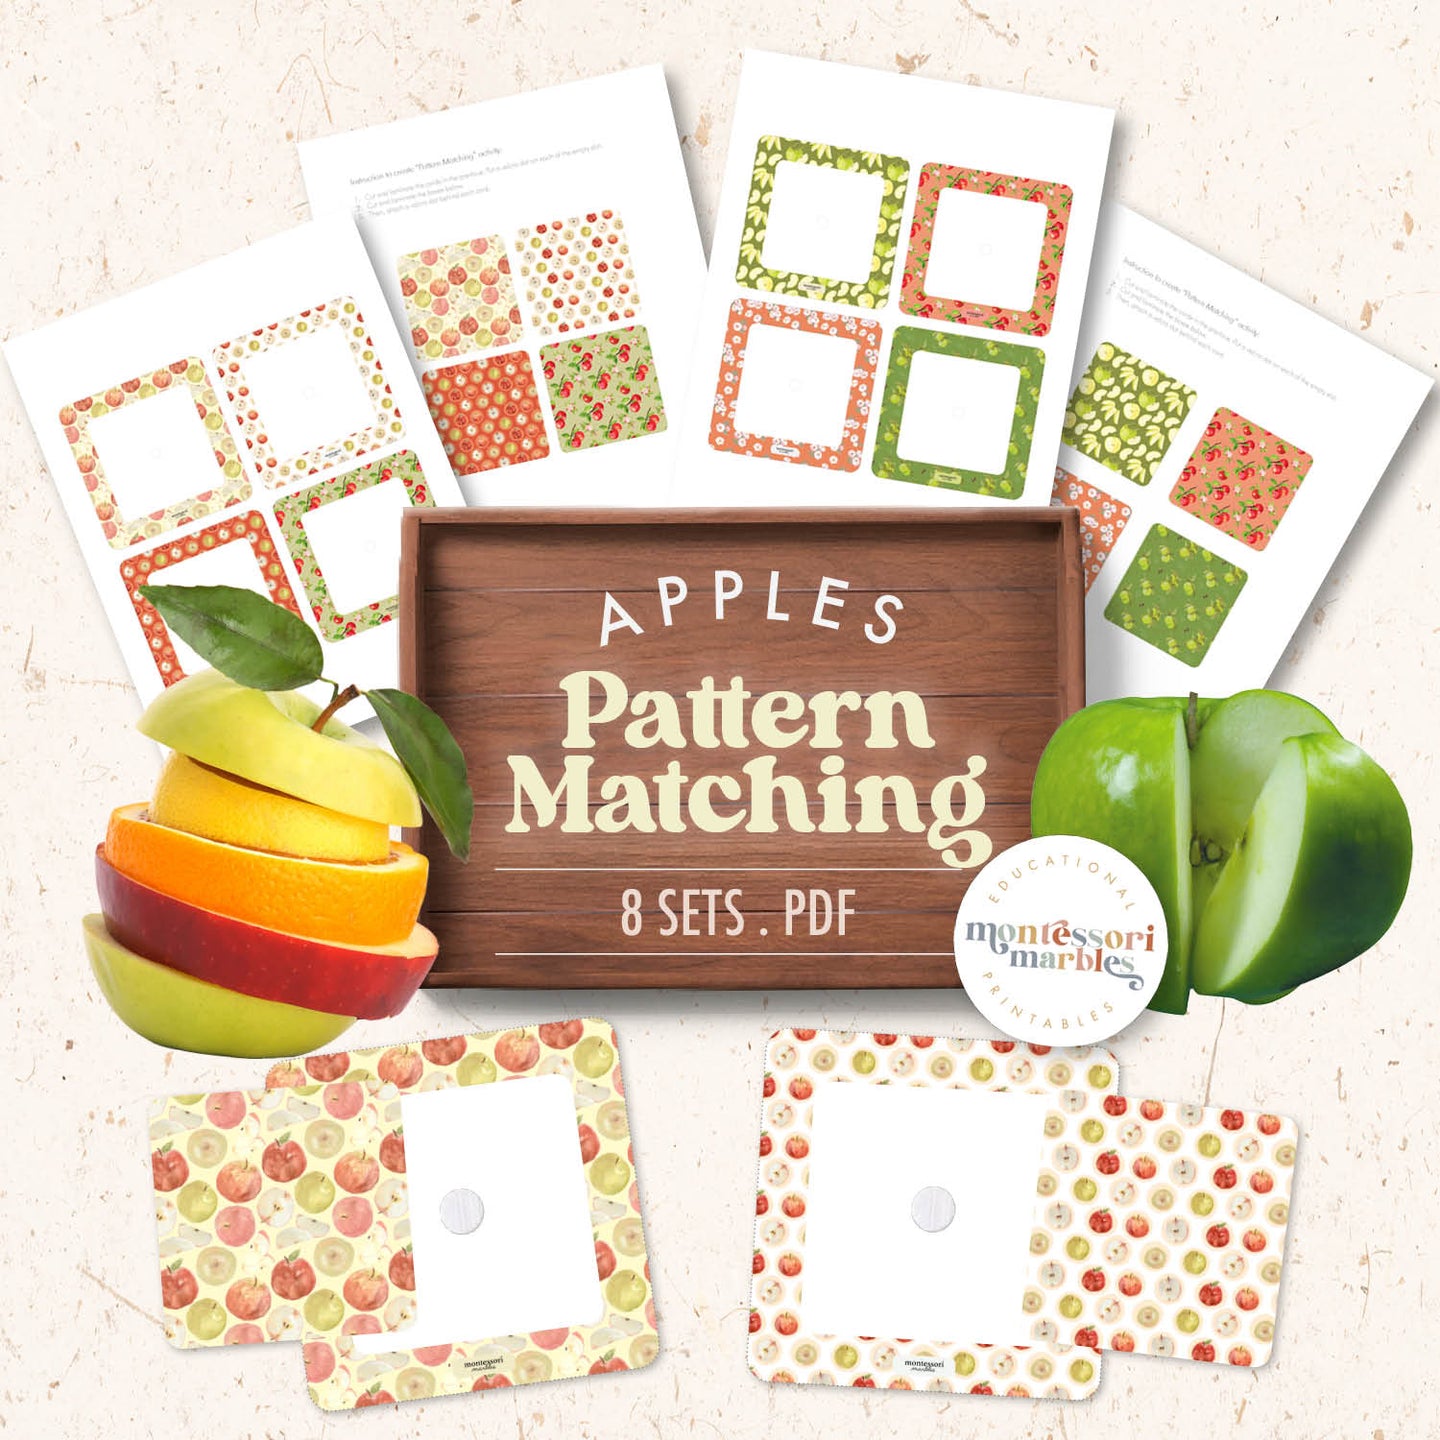 Apples Pattern Matching Puzzle